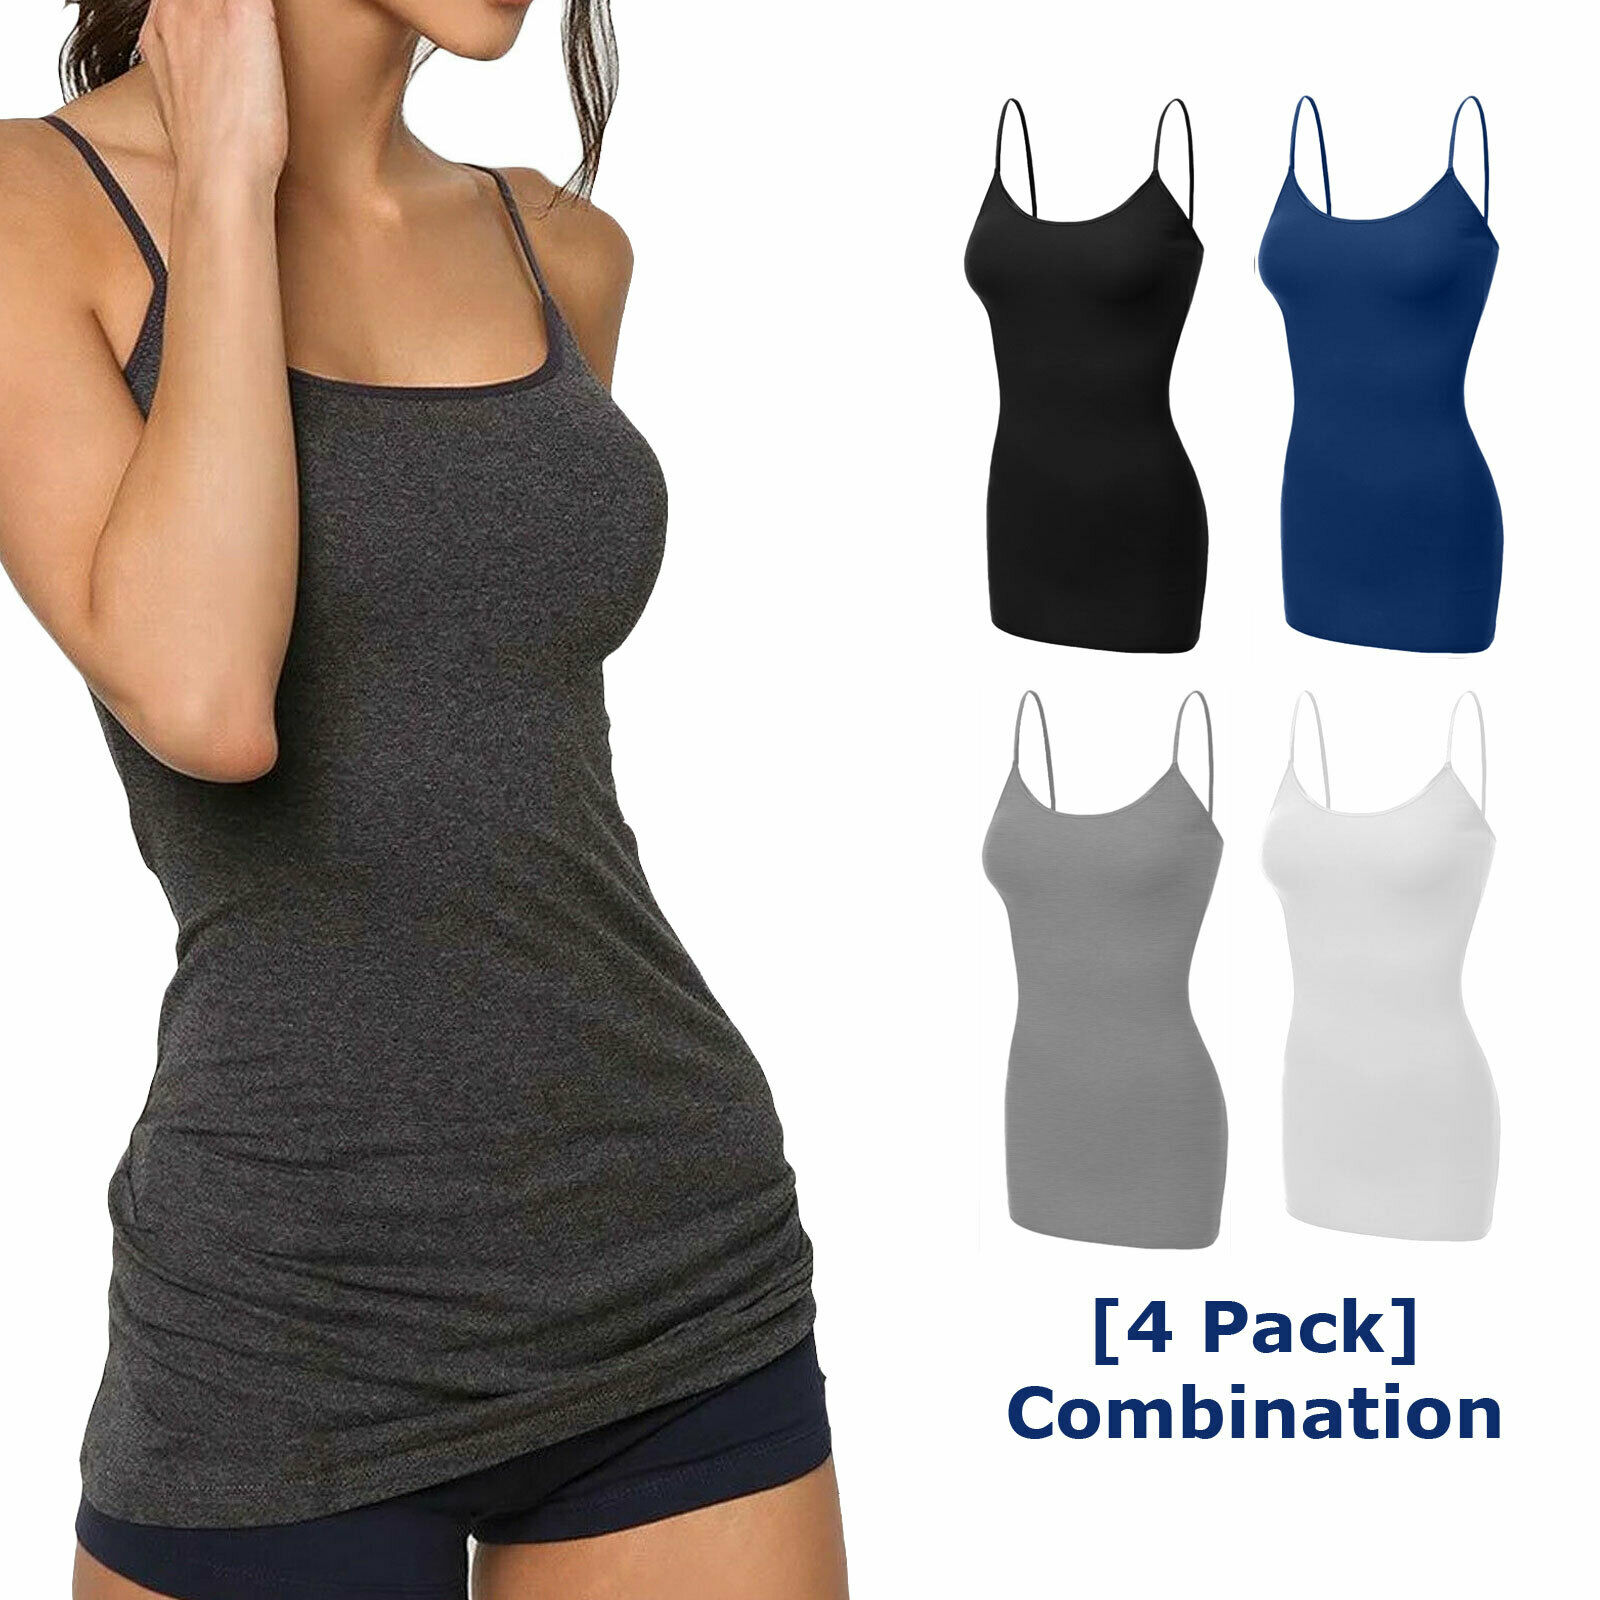 [4 Pack] Women Long Cami Tank Tops Cotton Blend Fit Basic Camisole Top W/ Straps